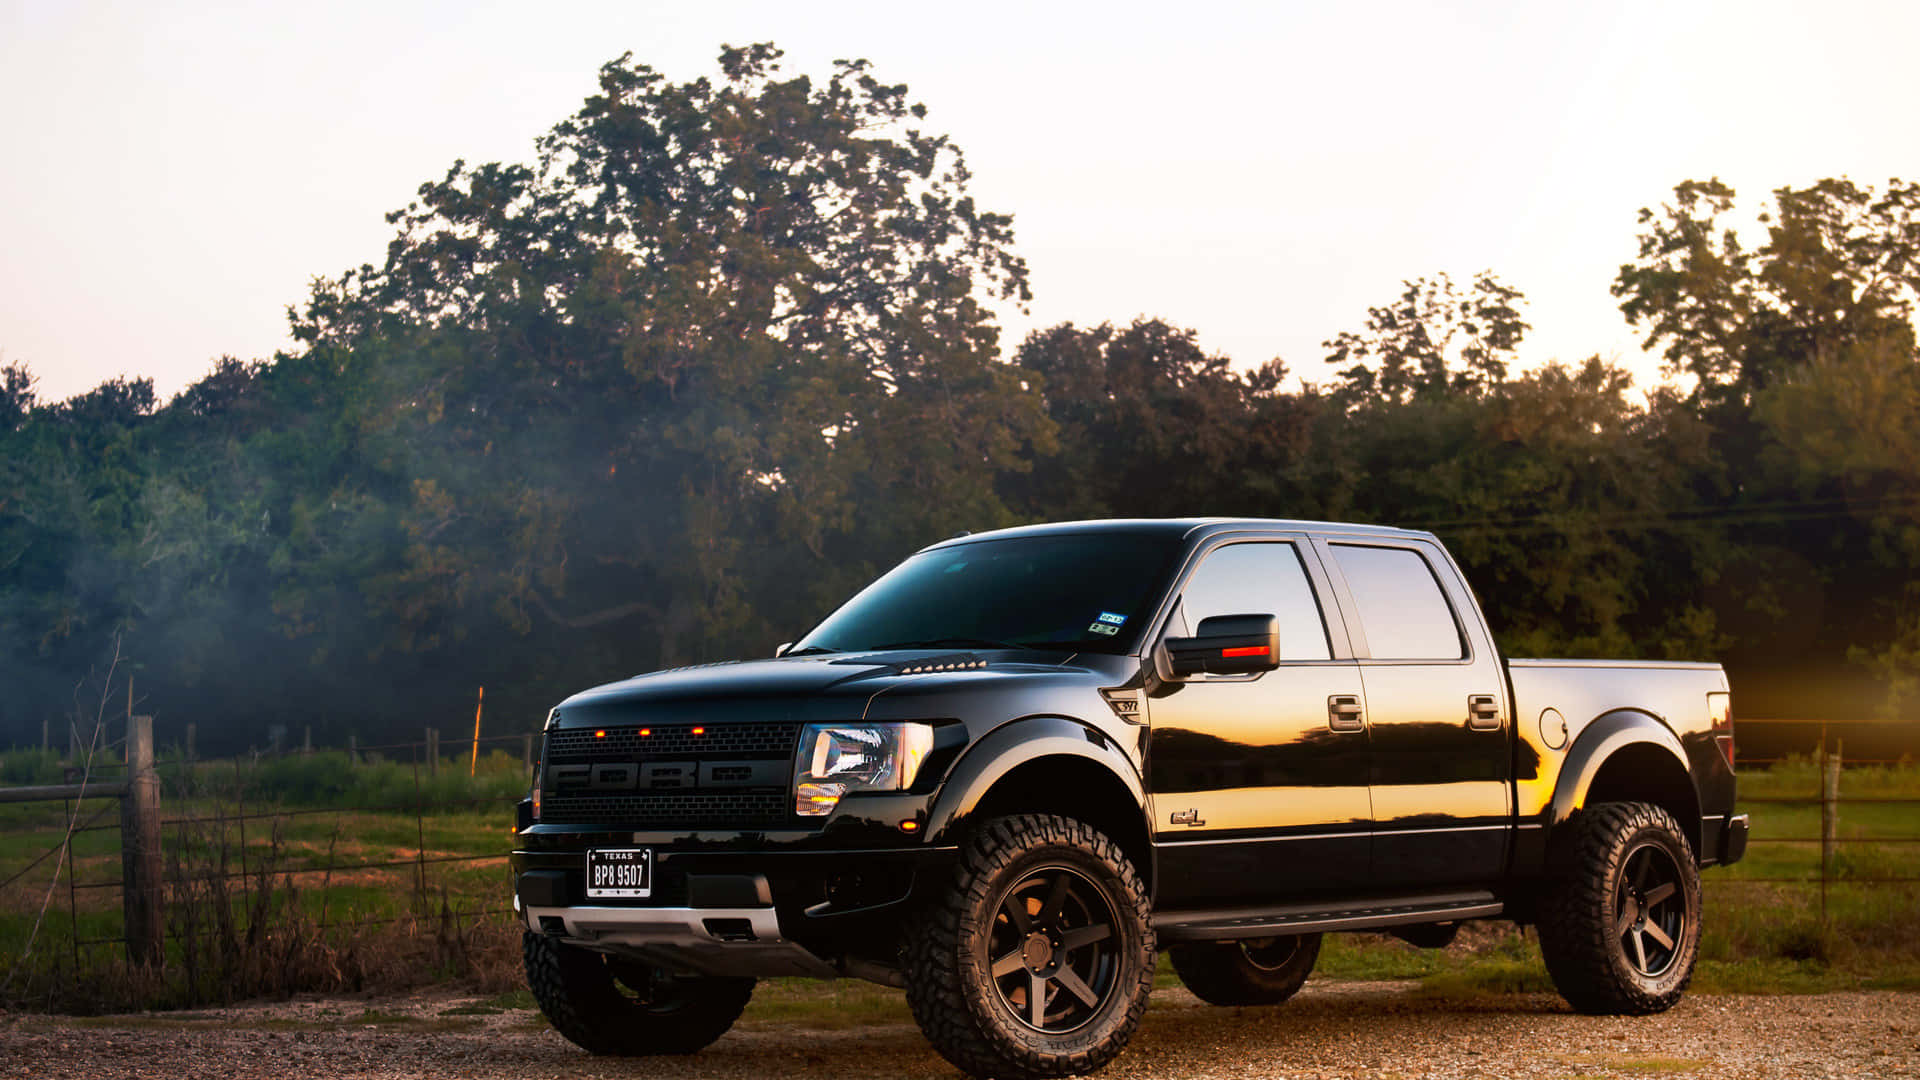 Explore the Great Outdoors in the All-New Ford Truck Wallpaper